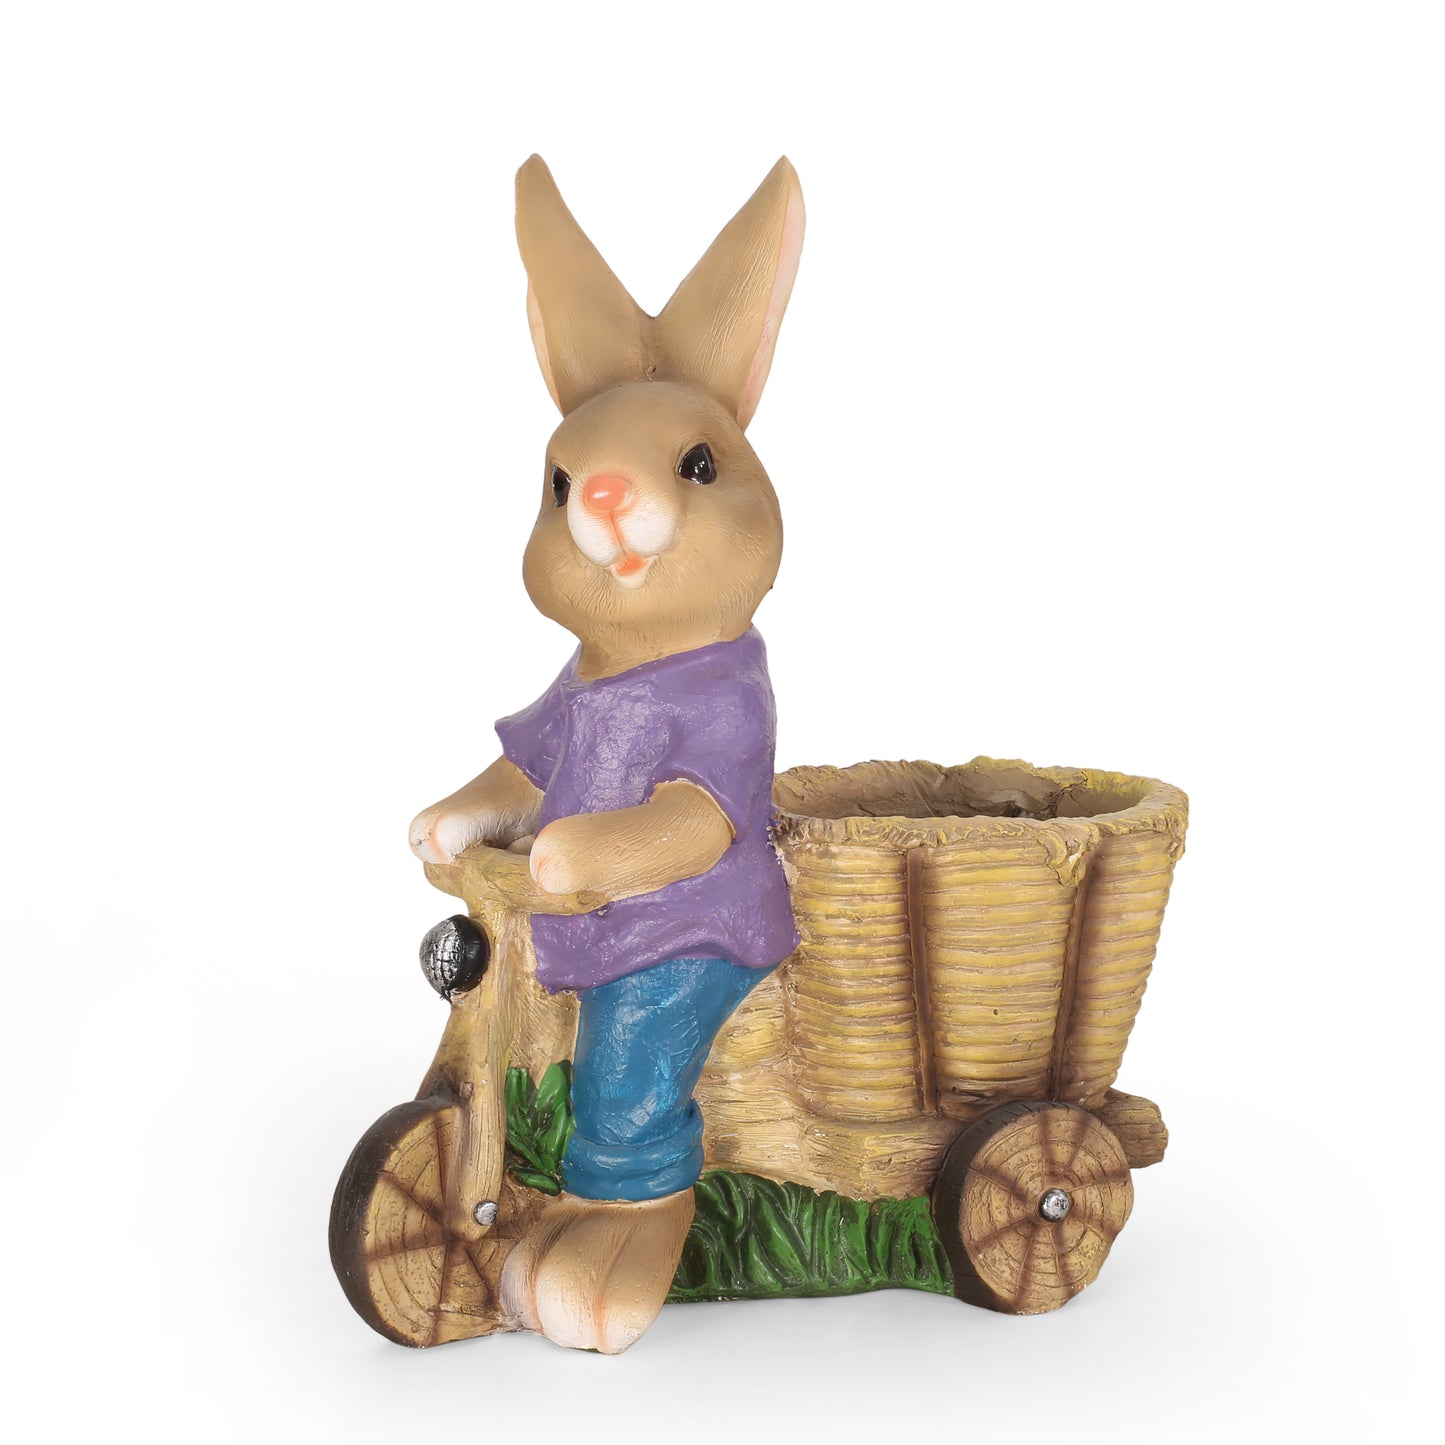 Randy Outdoor Decorative Rabbit Planter, Brown and Blue